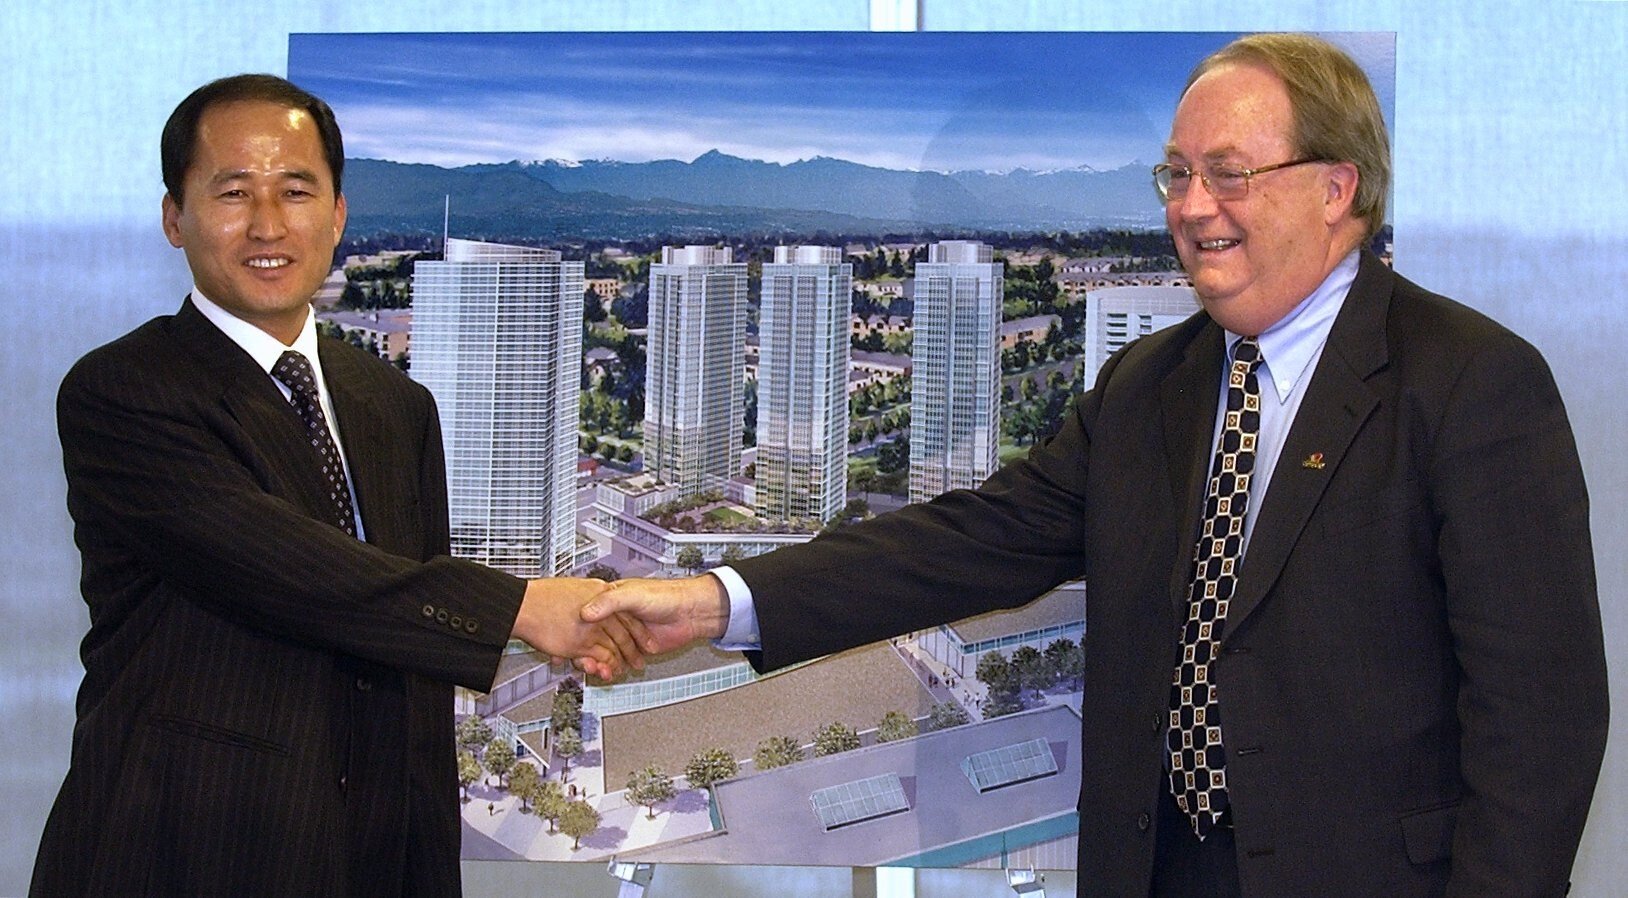 South Korean developer Jung Myung-soo is seen at the unveiling of his plans for the Central City project in Surrey, British Columbia, in 2005, with Surrey’s mayor, Doug McCallum. At the time it was to be the biggest residential and retail development in Surrey‘s history. Photo: Material republished with the express permission of Vancouver Province, a division of Postmedia Network Inc